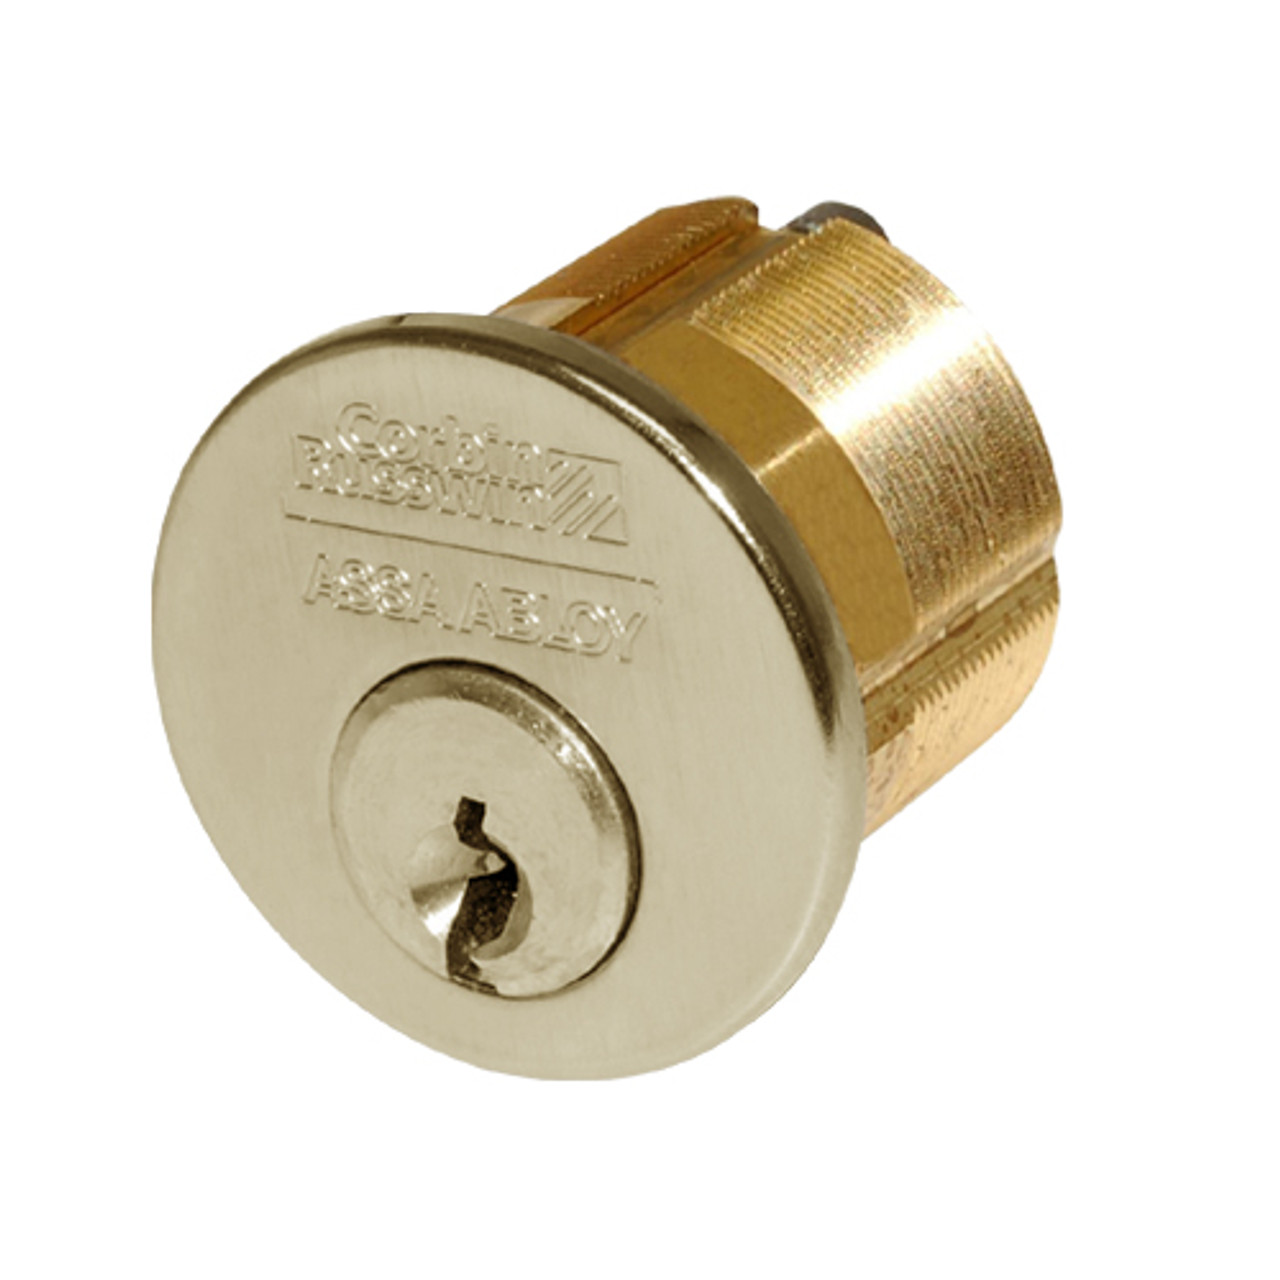 CR1000-118-A01-6-57B1-606 Corbin Conventional Mortise Cylinder for Mortise Lock and DL3000 Deadlocks with Cloverleaf Cam in Satin Brass Finish